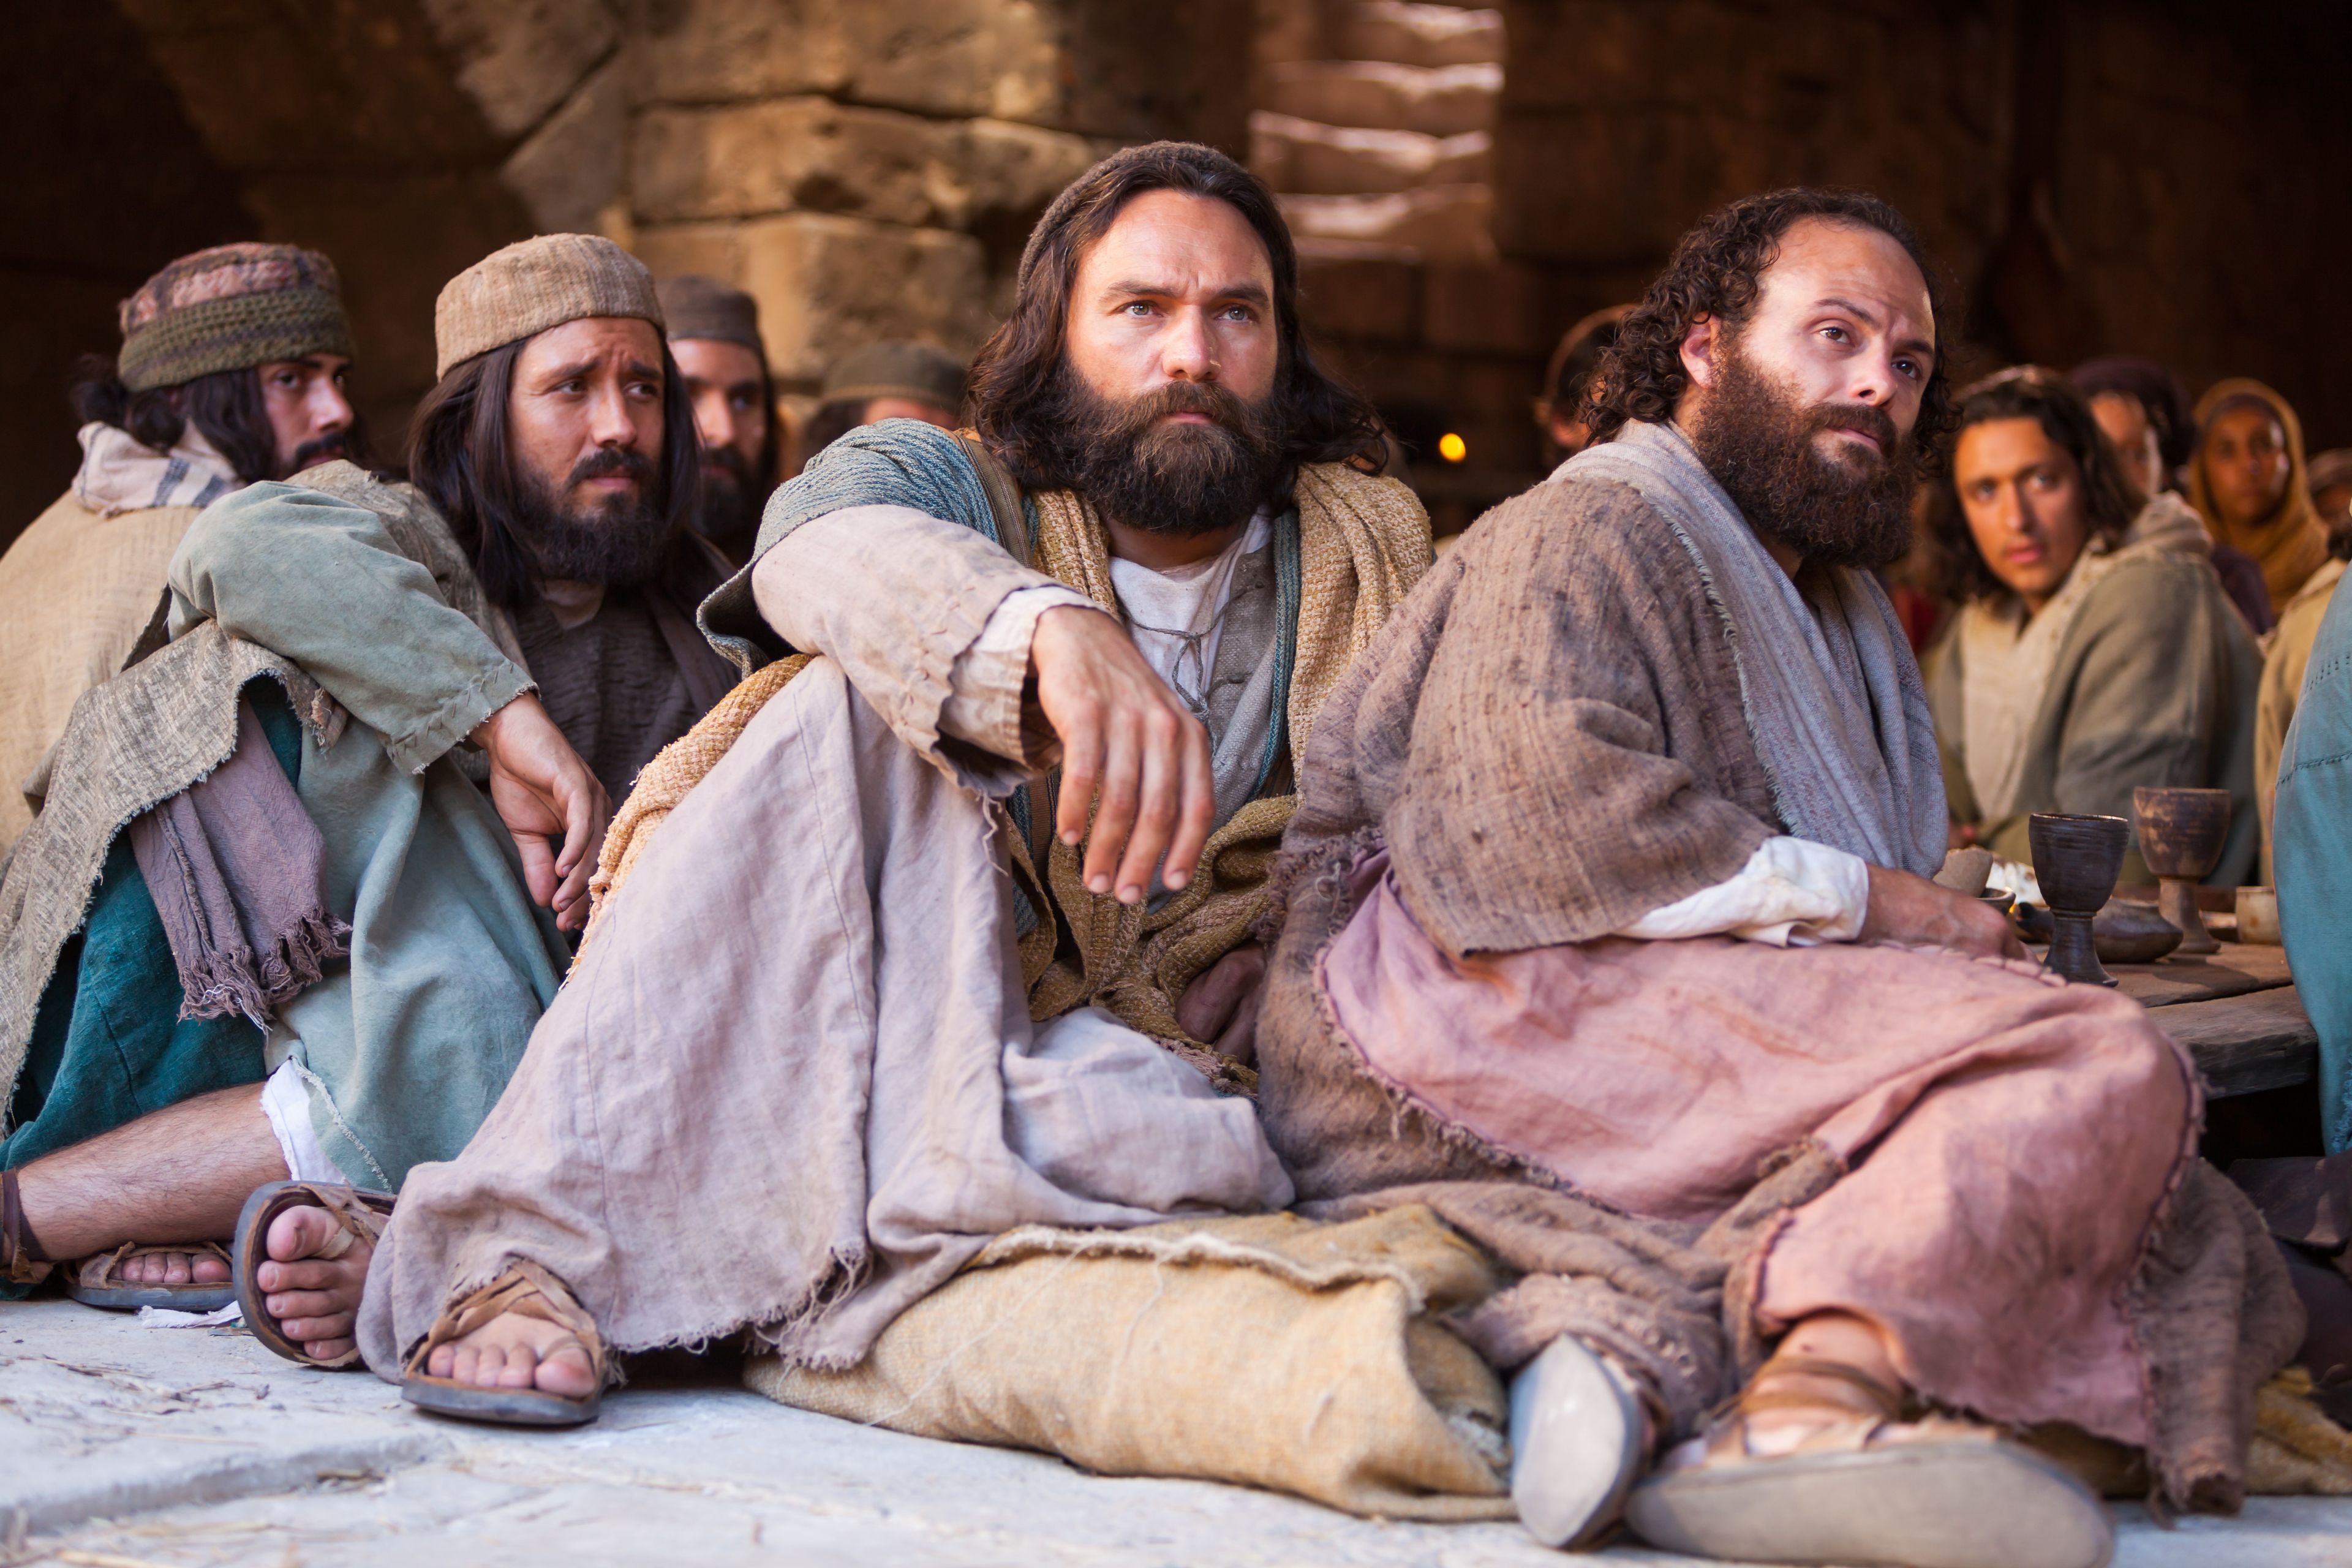 Christ’s Apostles listen to Him speak of our need to “become as little children.”